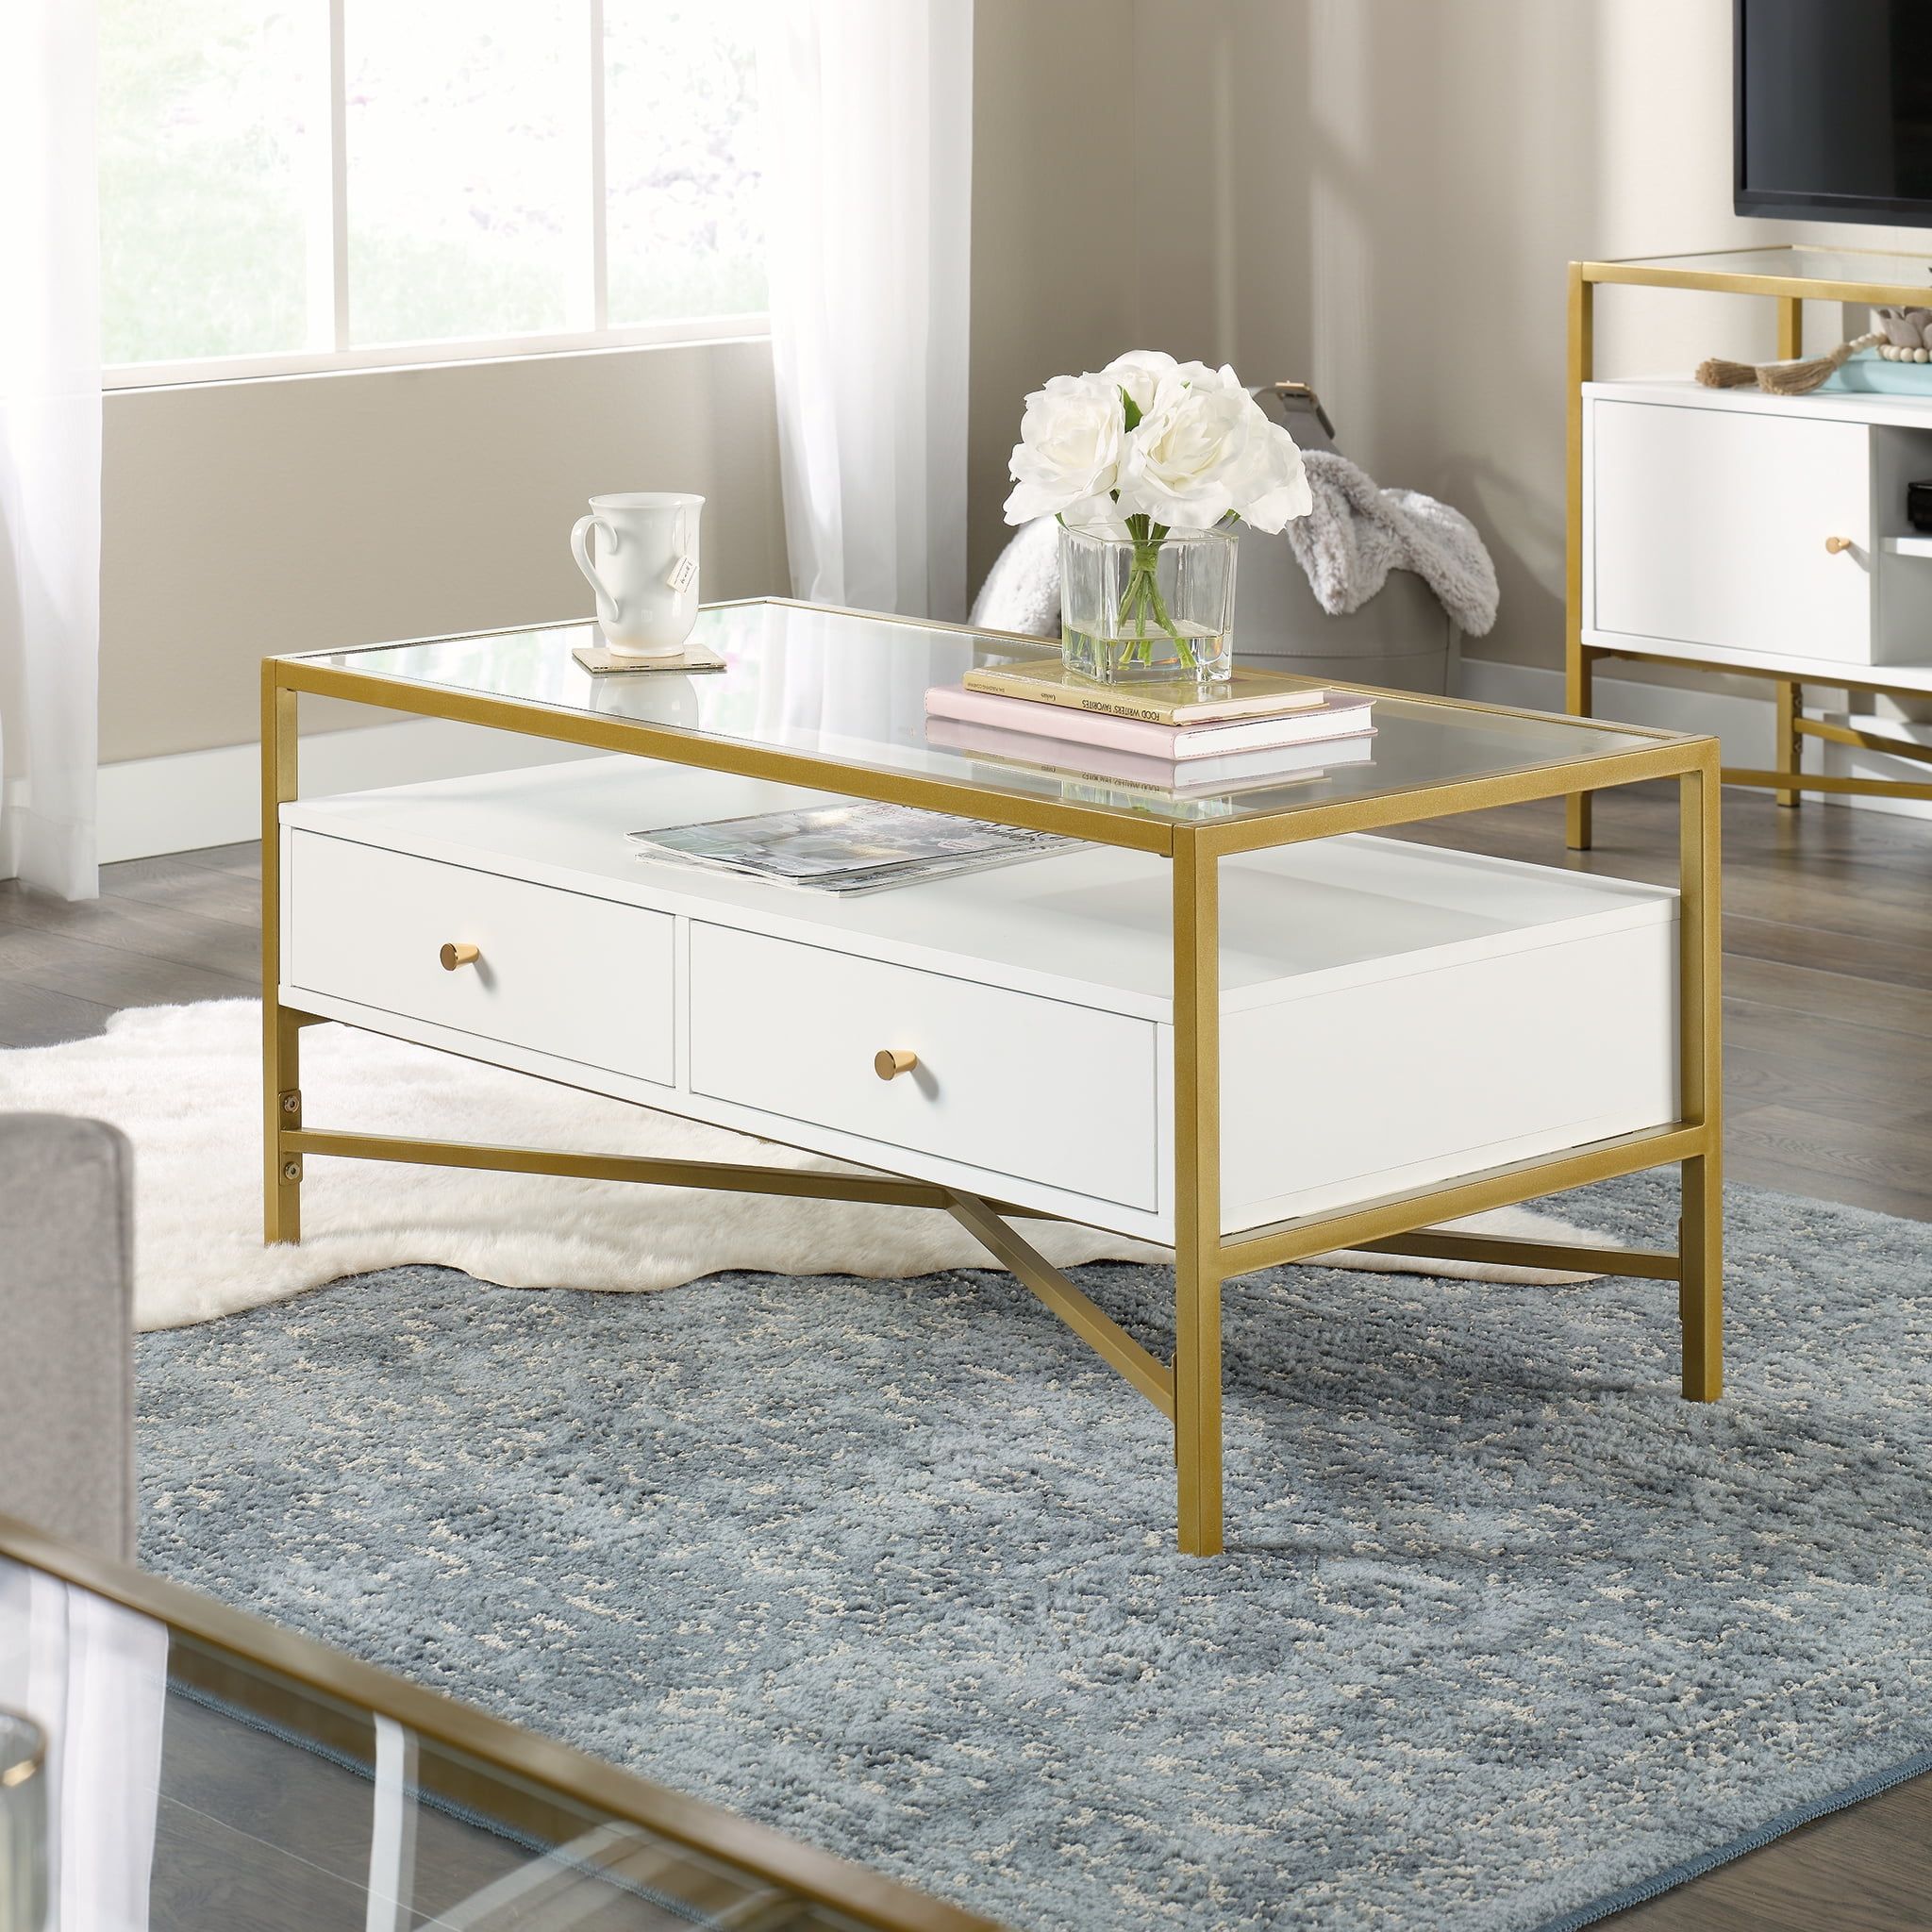 Curiod Glass Top Gold Metal Rectangular Coffee Table With Storage, White  Finish – Walmart For Glass Top Coffee Tables (View 11 of 15)